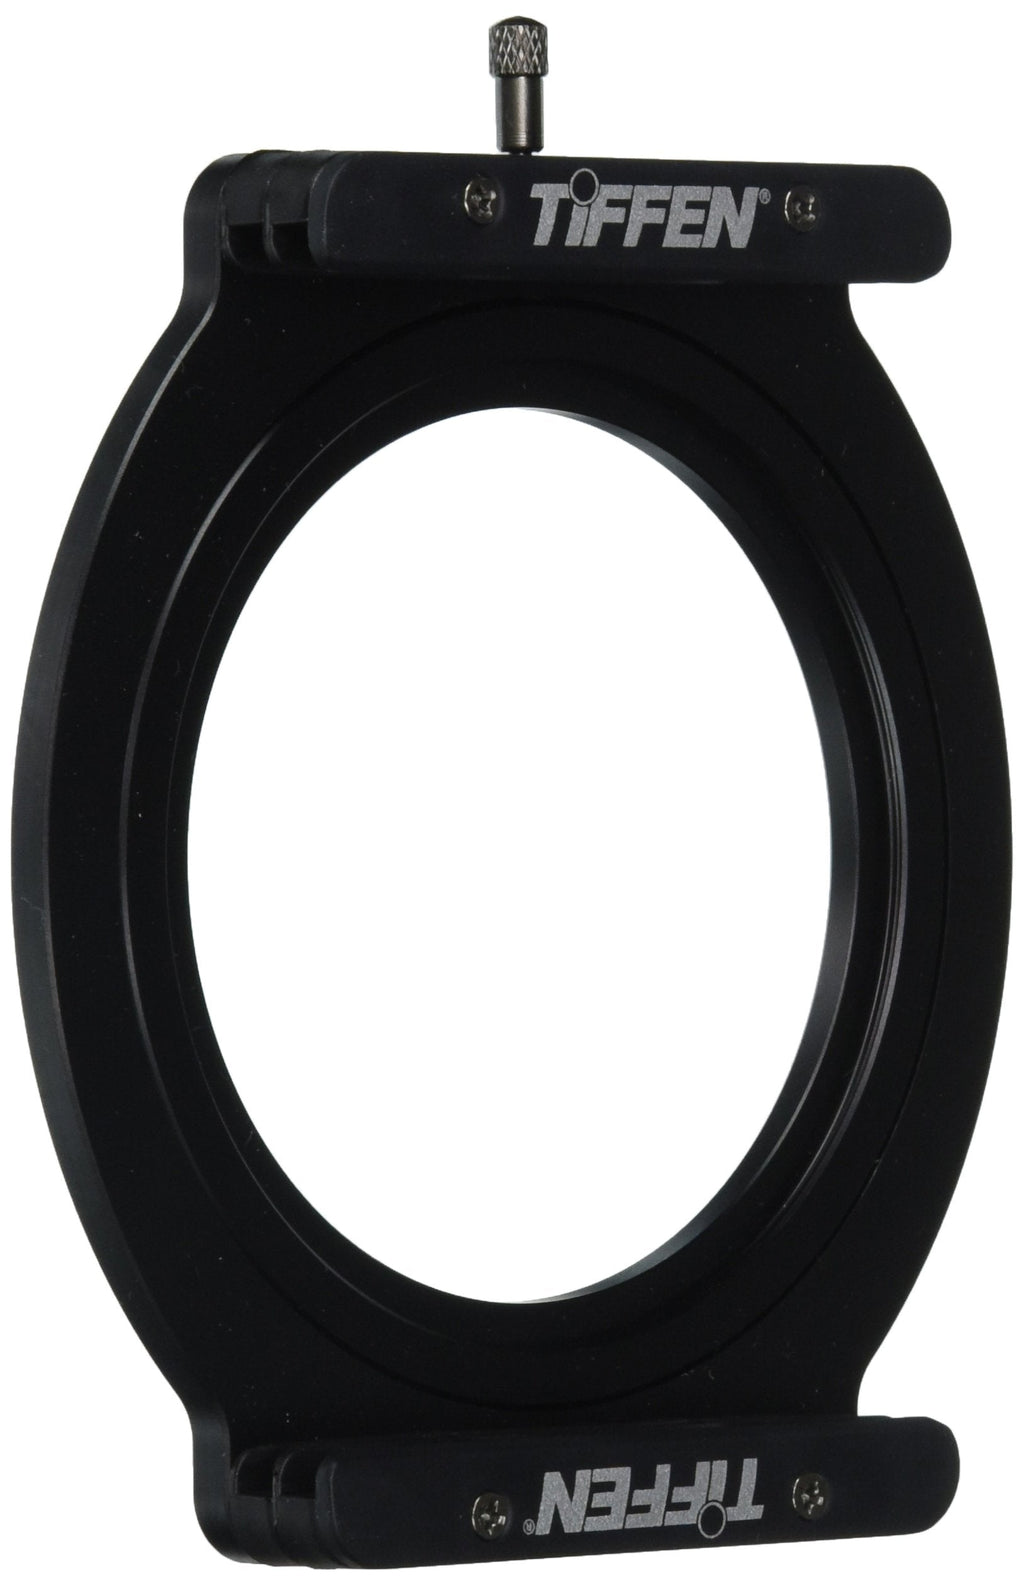 Tiffen Step Ring Camera Lens Square Filter, Black (PRO100HDR77) PRO100 4x4 adapter